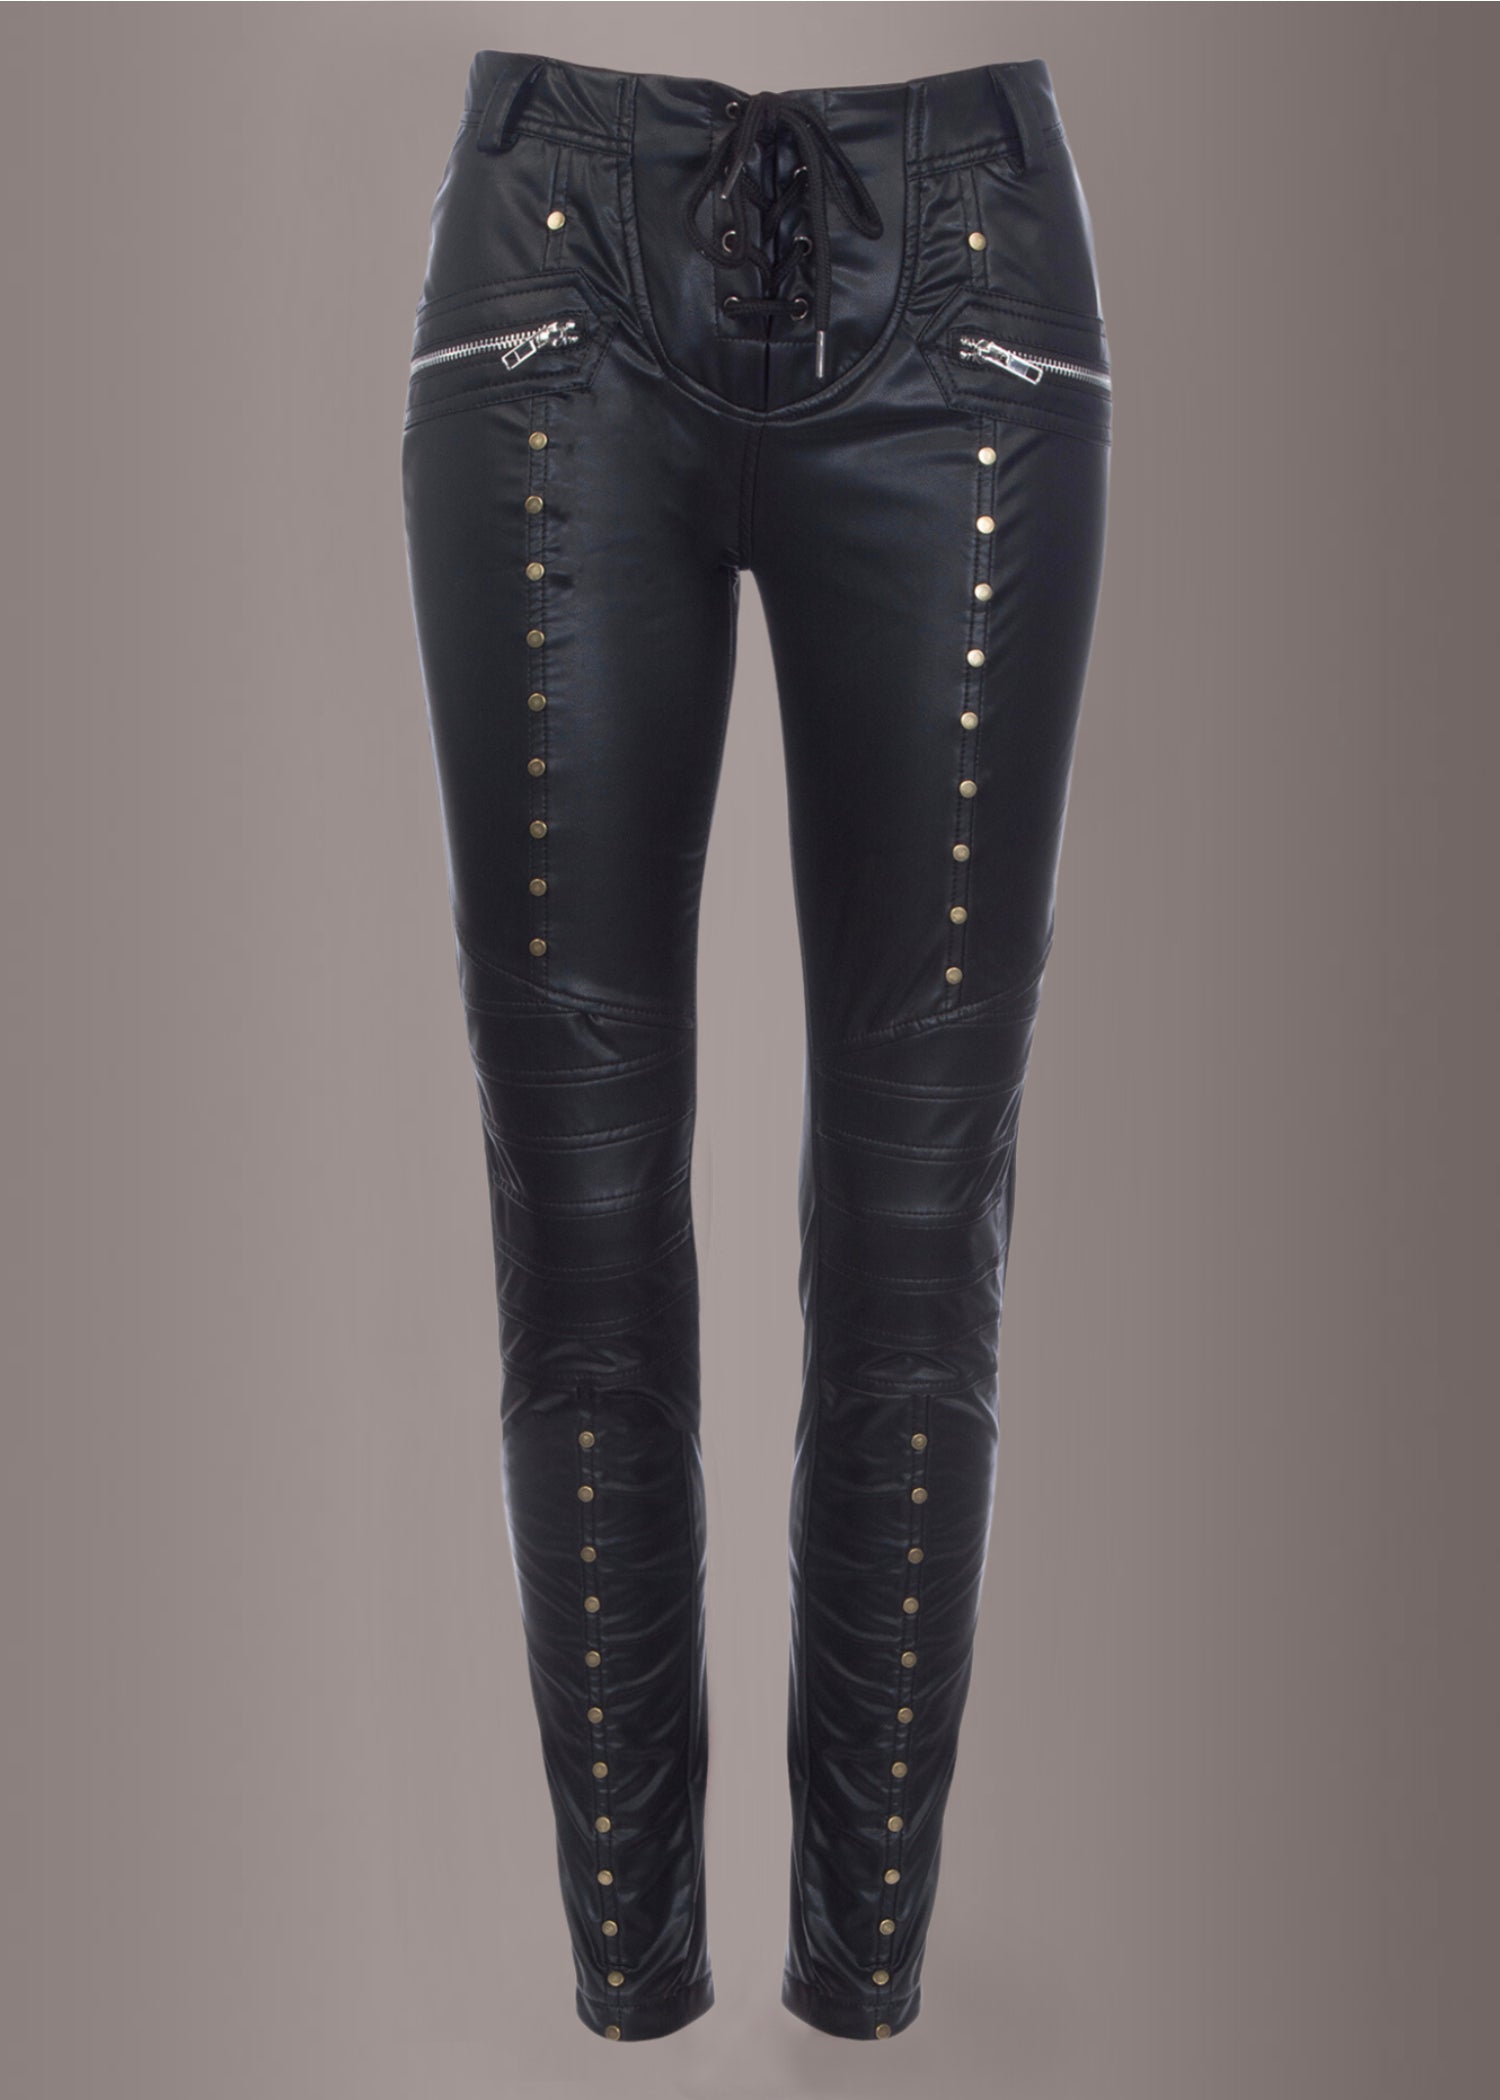 Leather Pants with Studs | Studded Leather Pants | Goth Pants | Pretty ...